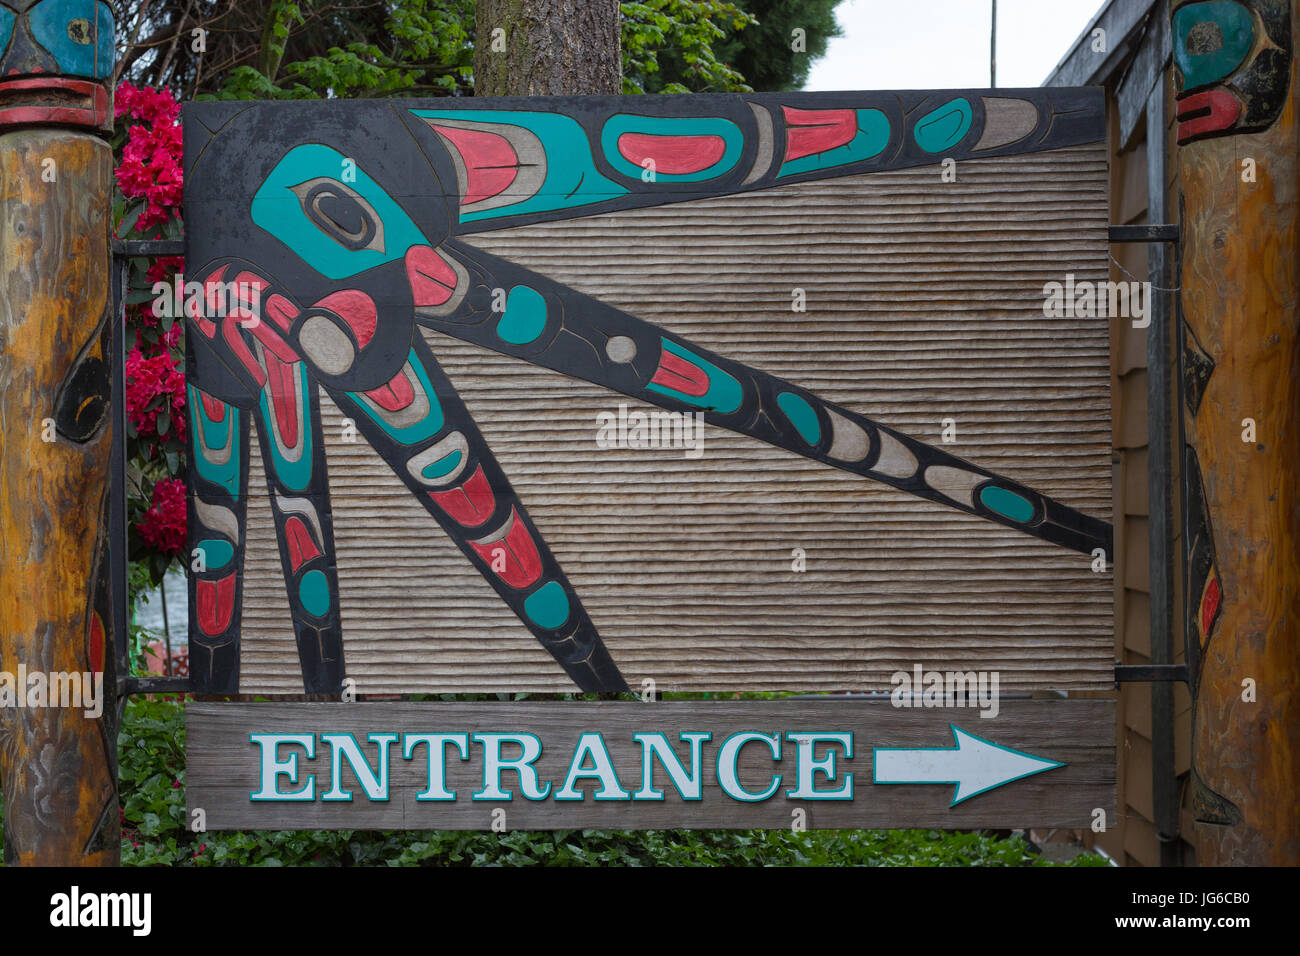 Entrance sign in Native American style at Ivar's Salmon House at Northlake Way in Seattle, Washington Stock Photo